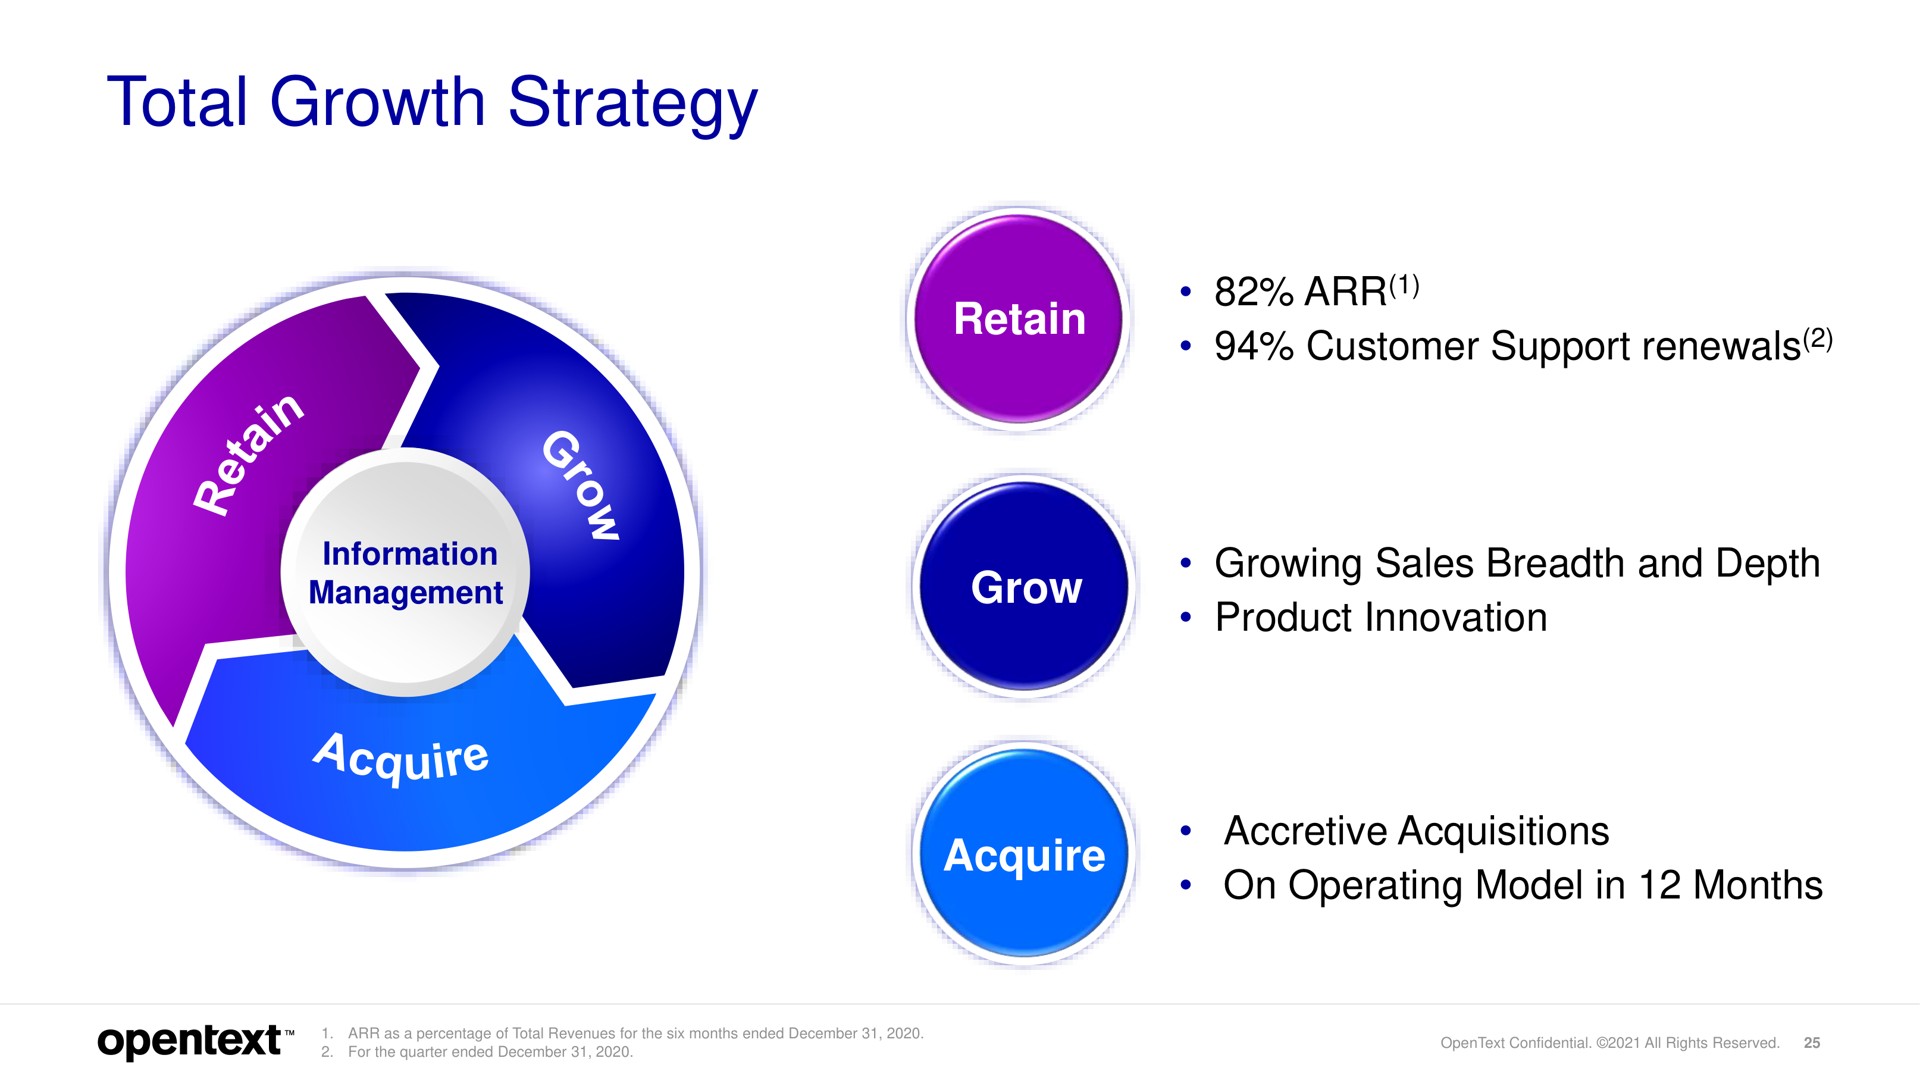 total growth strategy retain customer support renewals grow growing sales breadth and depth product innovation acquire accretive acquisitions on operating model in months | OpenText